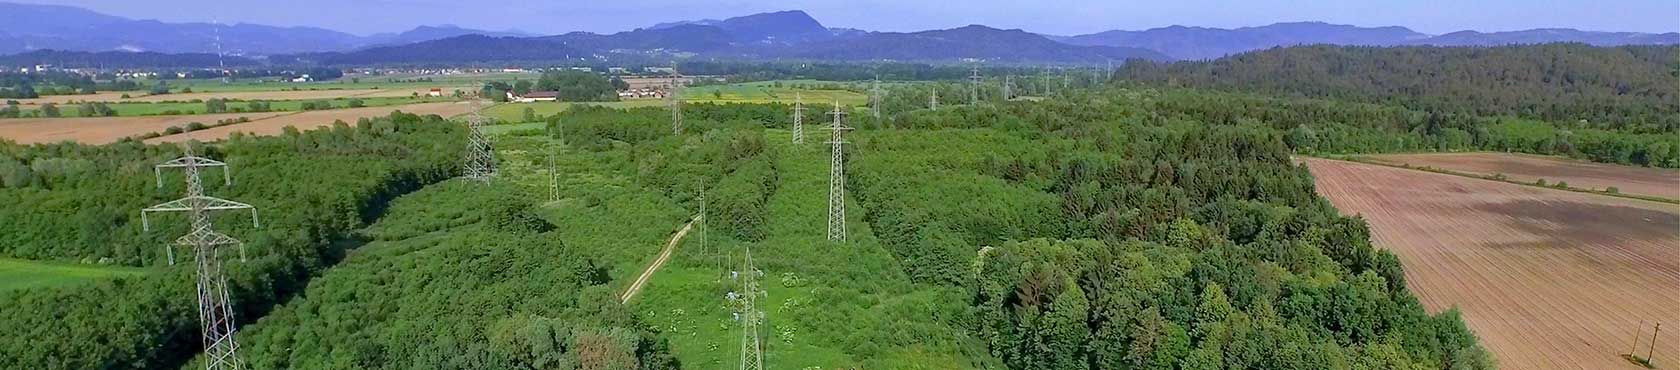 Field with high tension wires